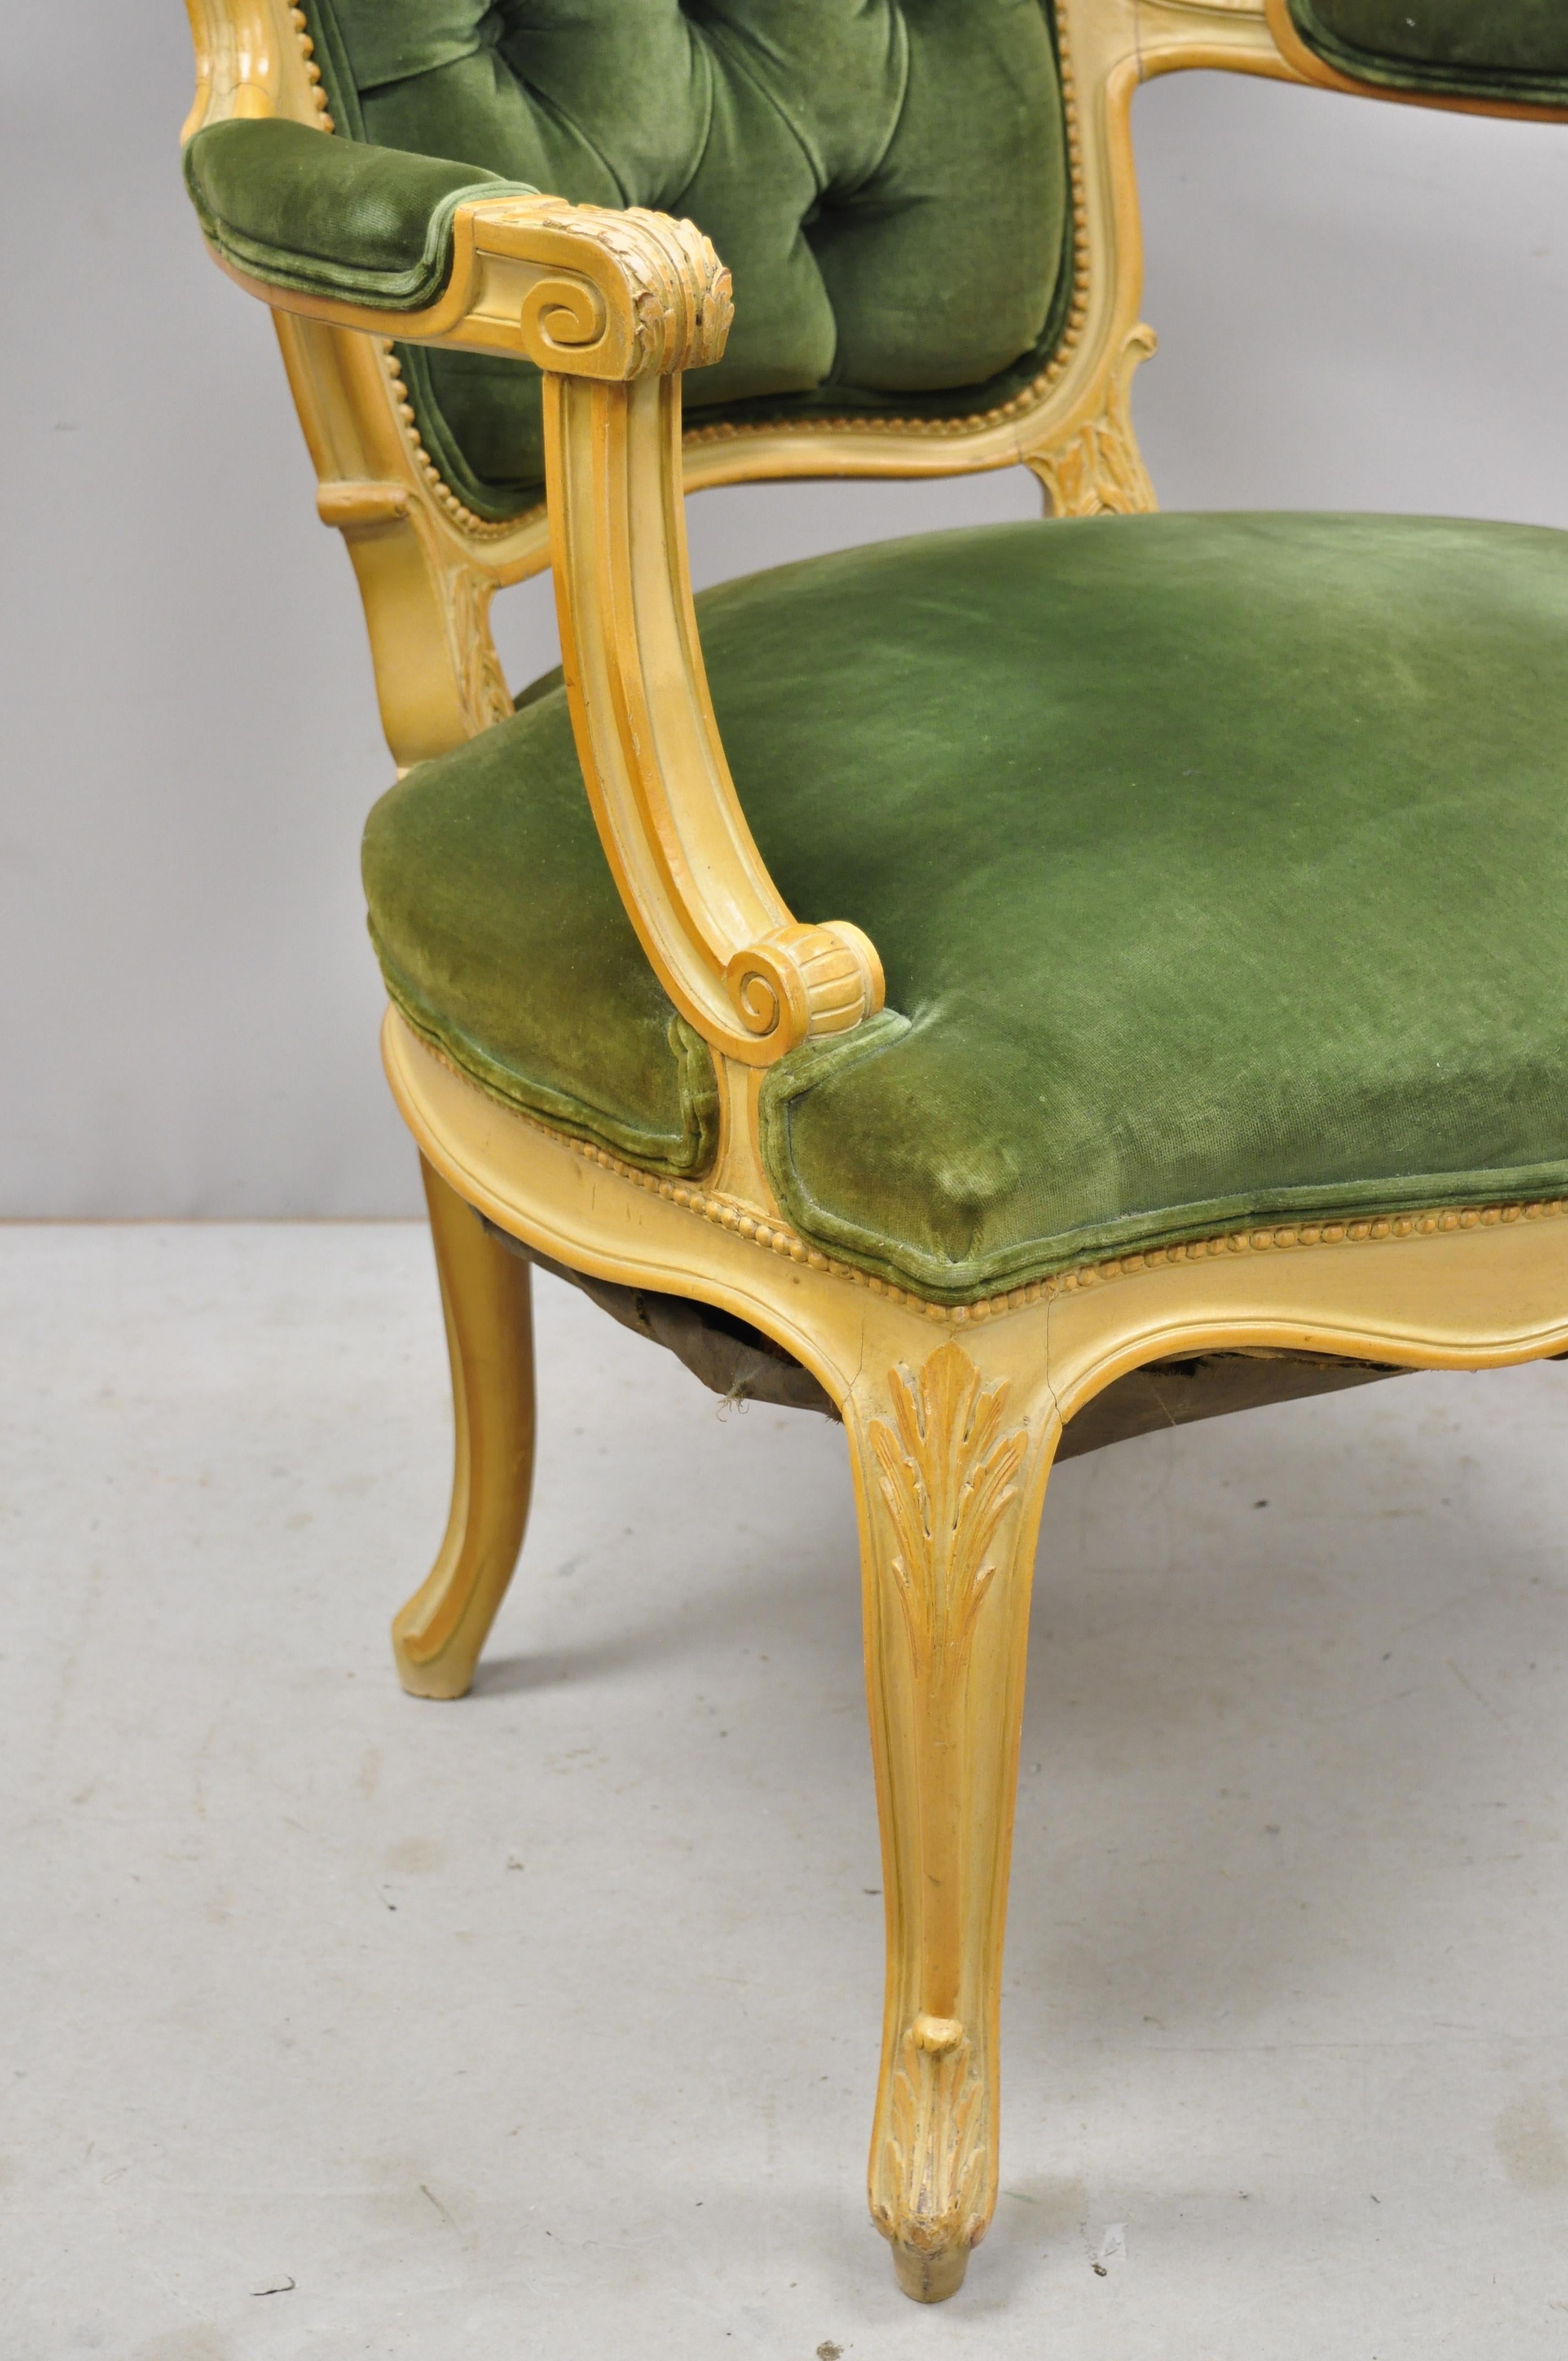 Antique French Louis XV Victorian Style Fauteuil Green Velvet Parlor Armchair 1